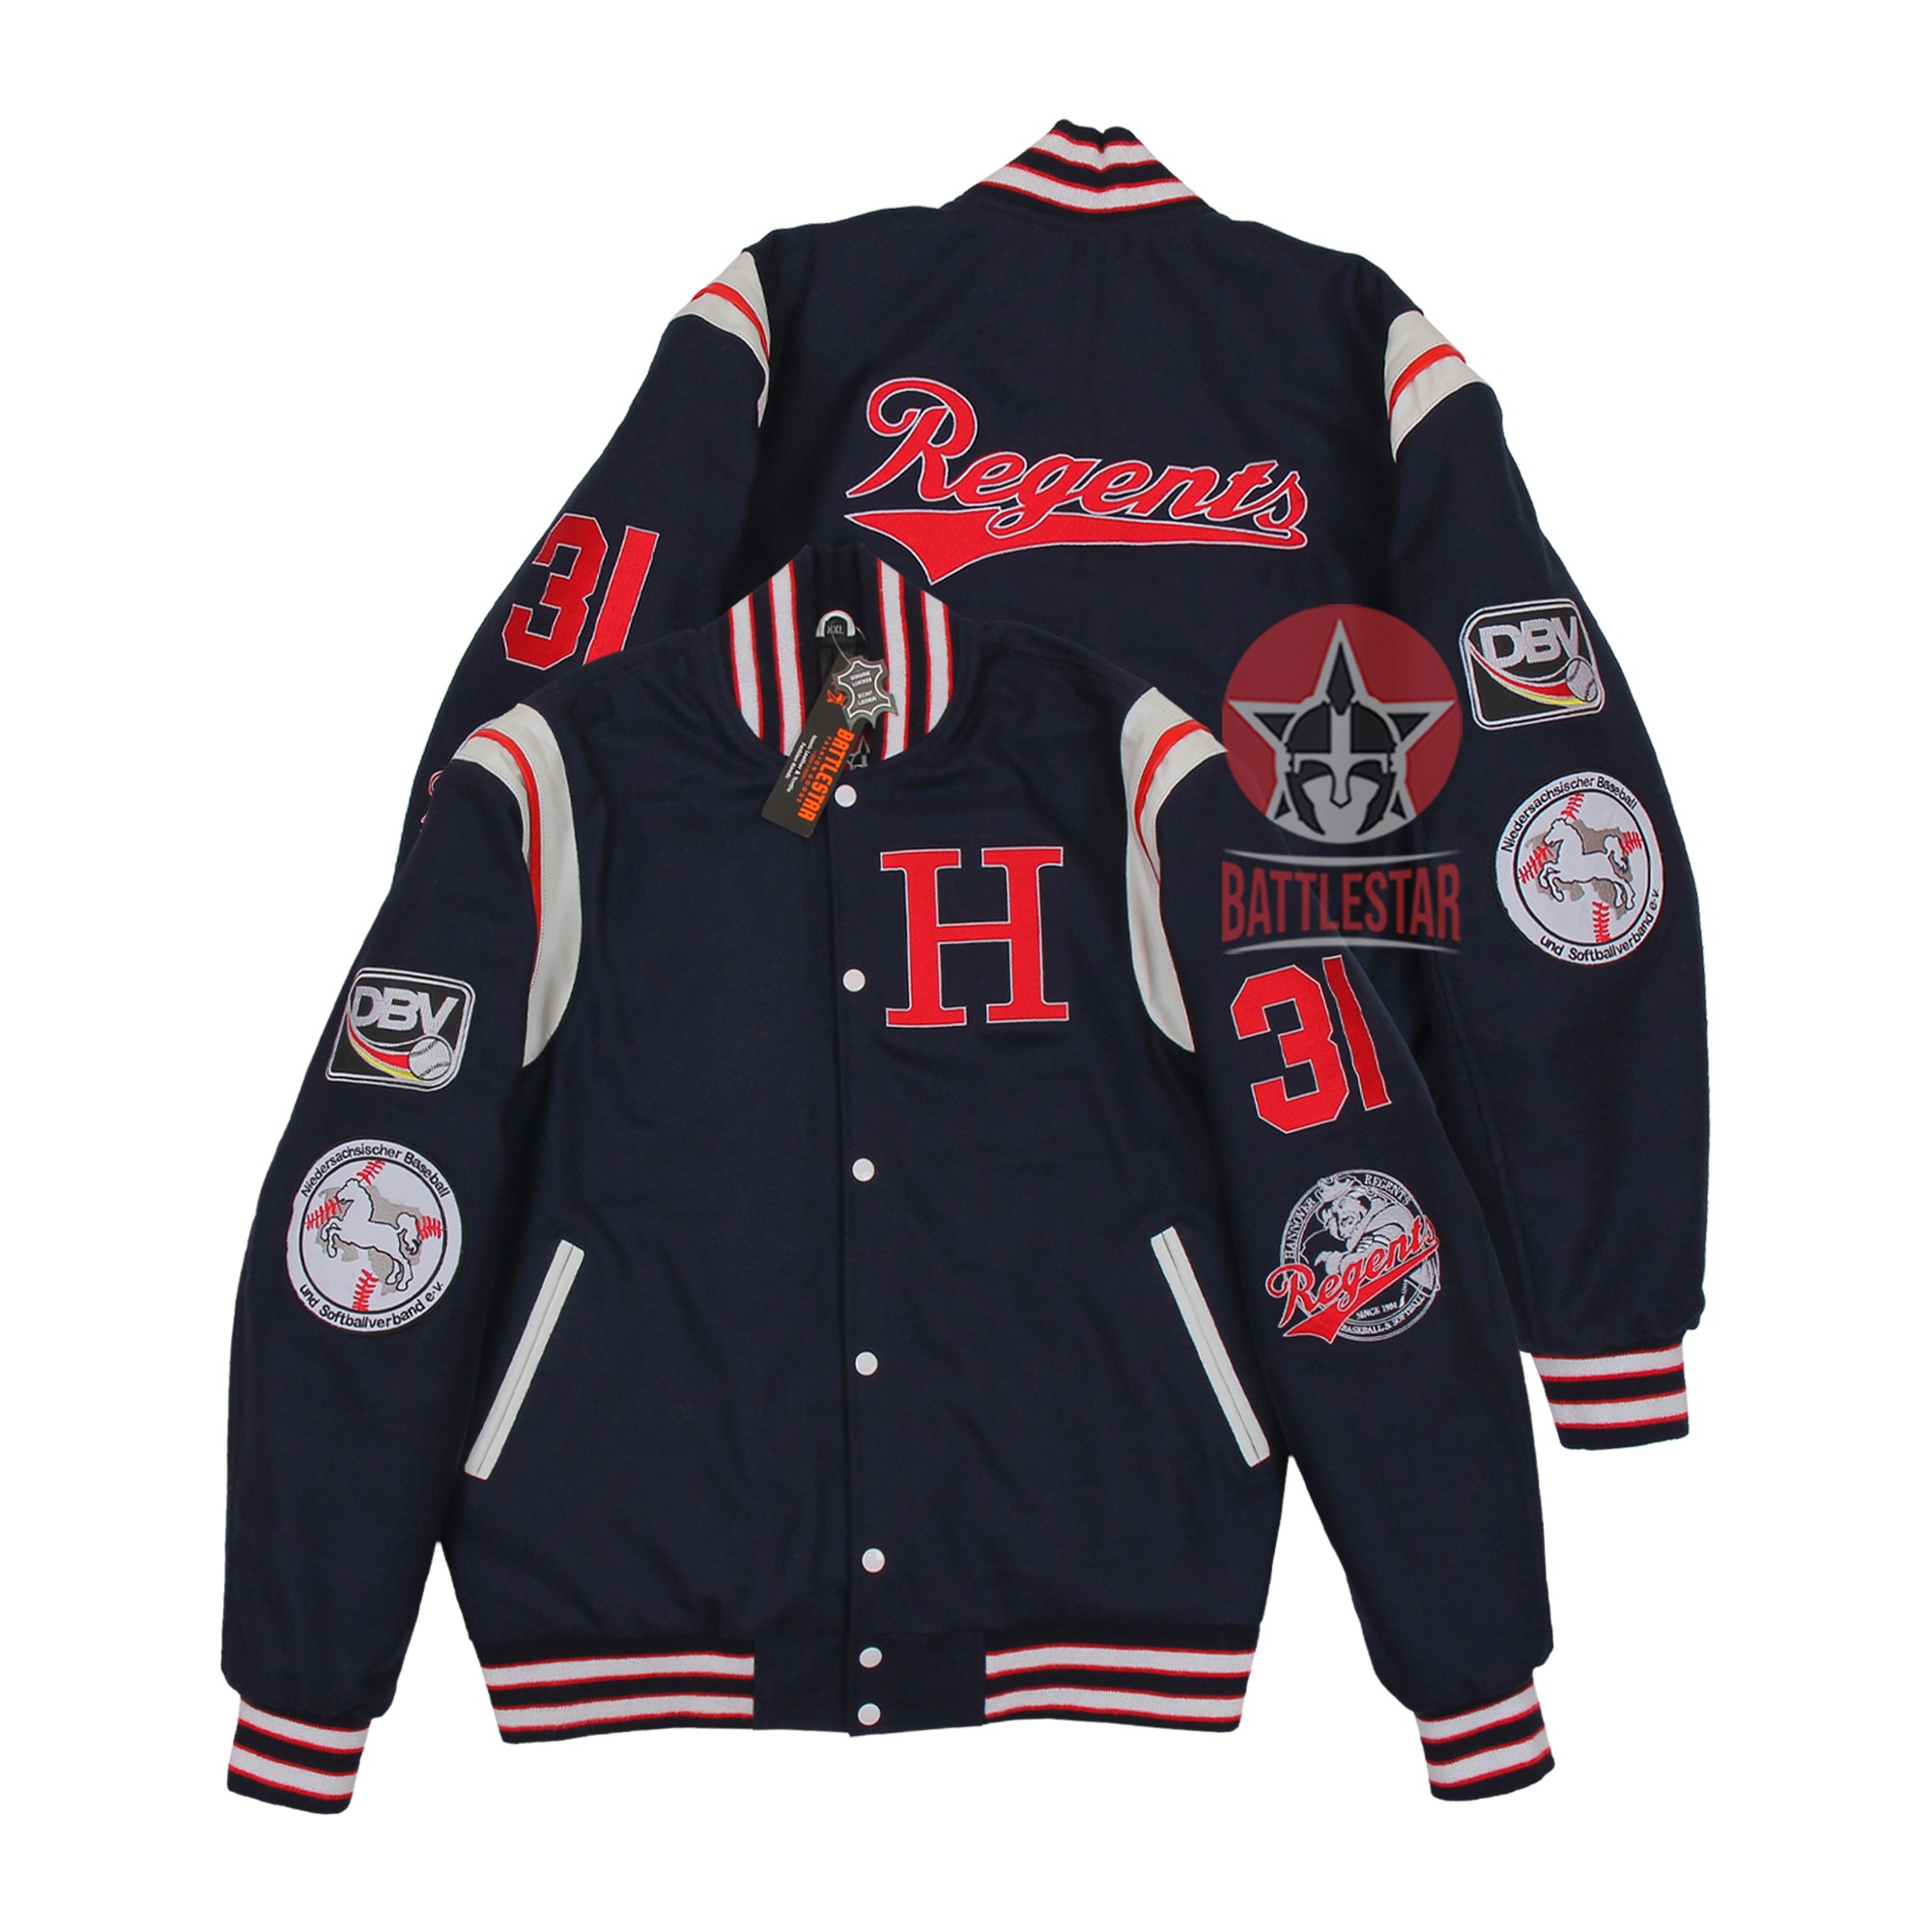 A Personalized High School Embroidered Varsity Jacket